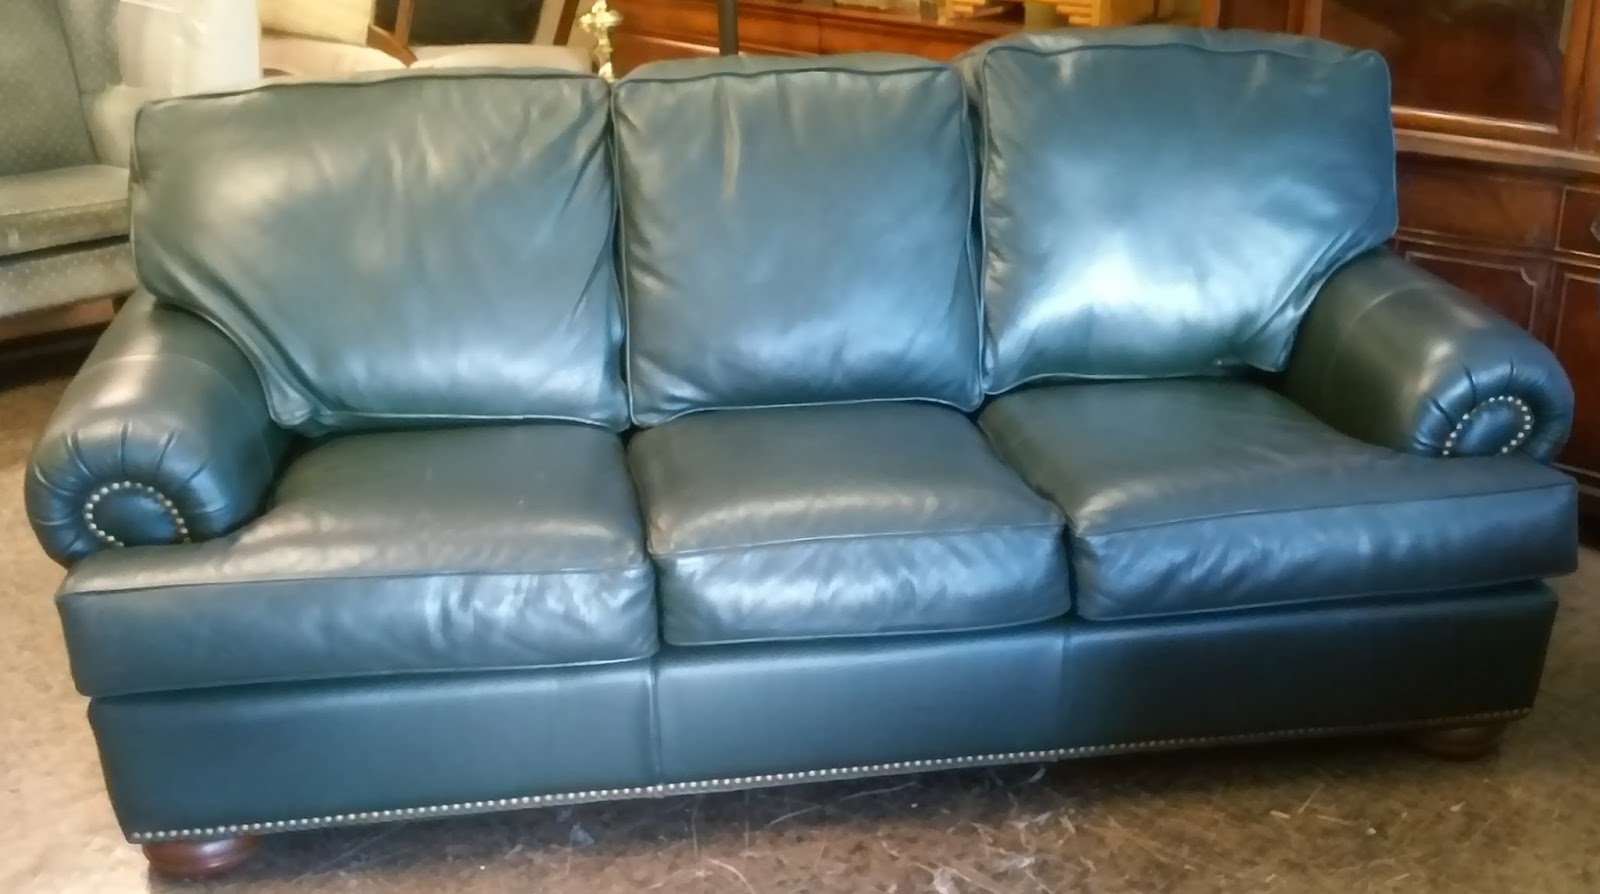 UHURU FURNITURE & COLLECTIBLES: SOLD Heritage Forest Green ...